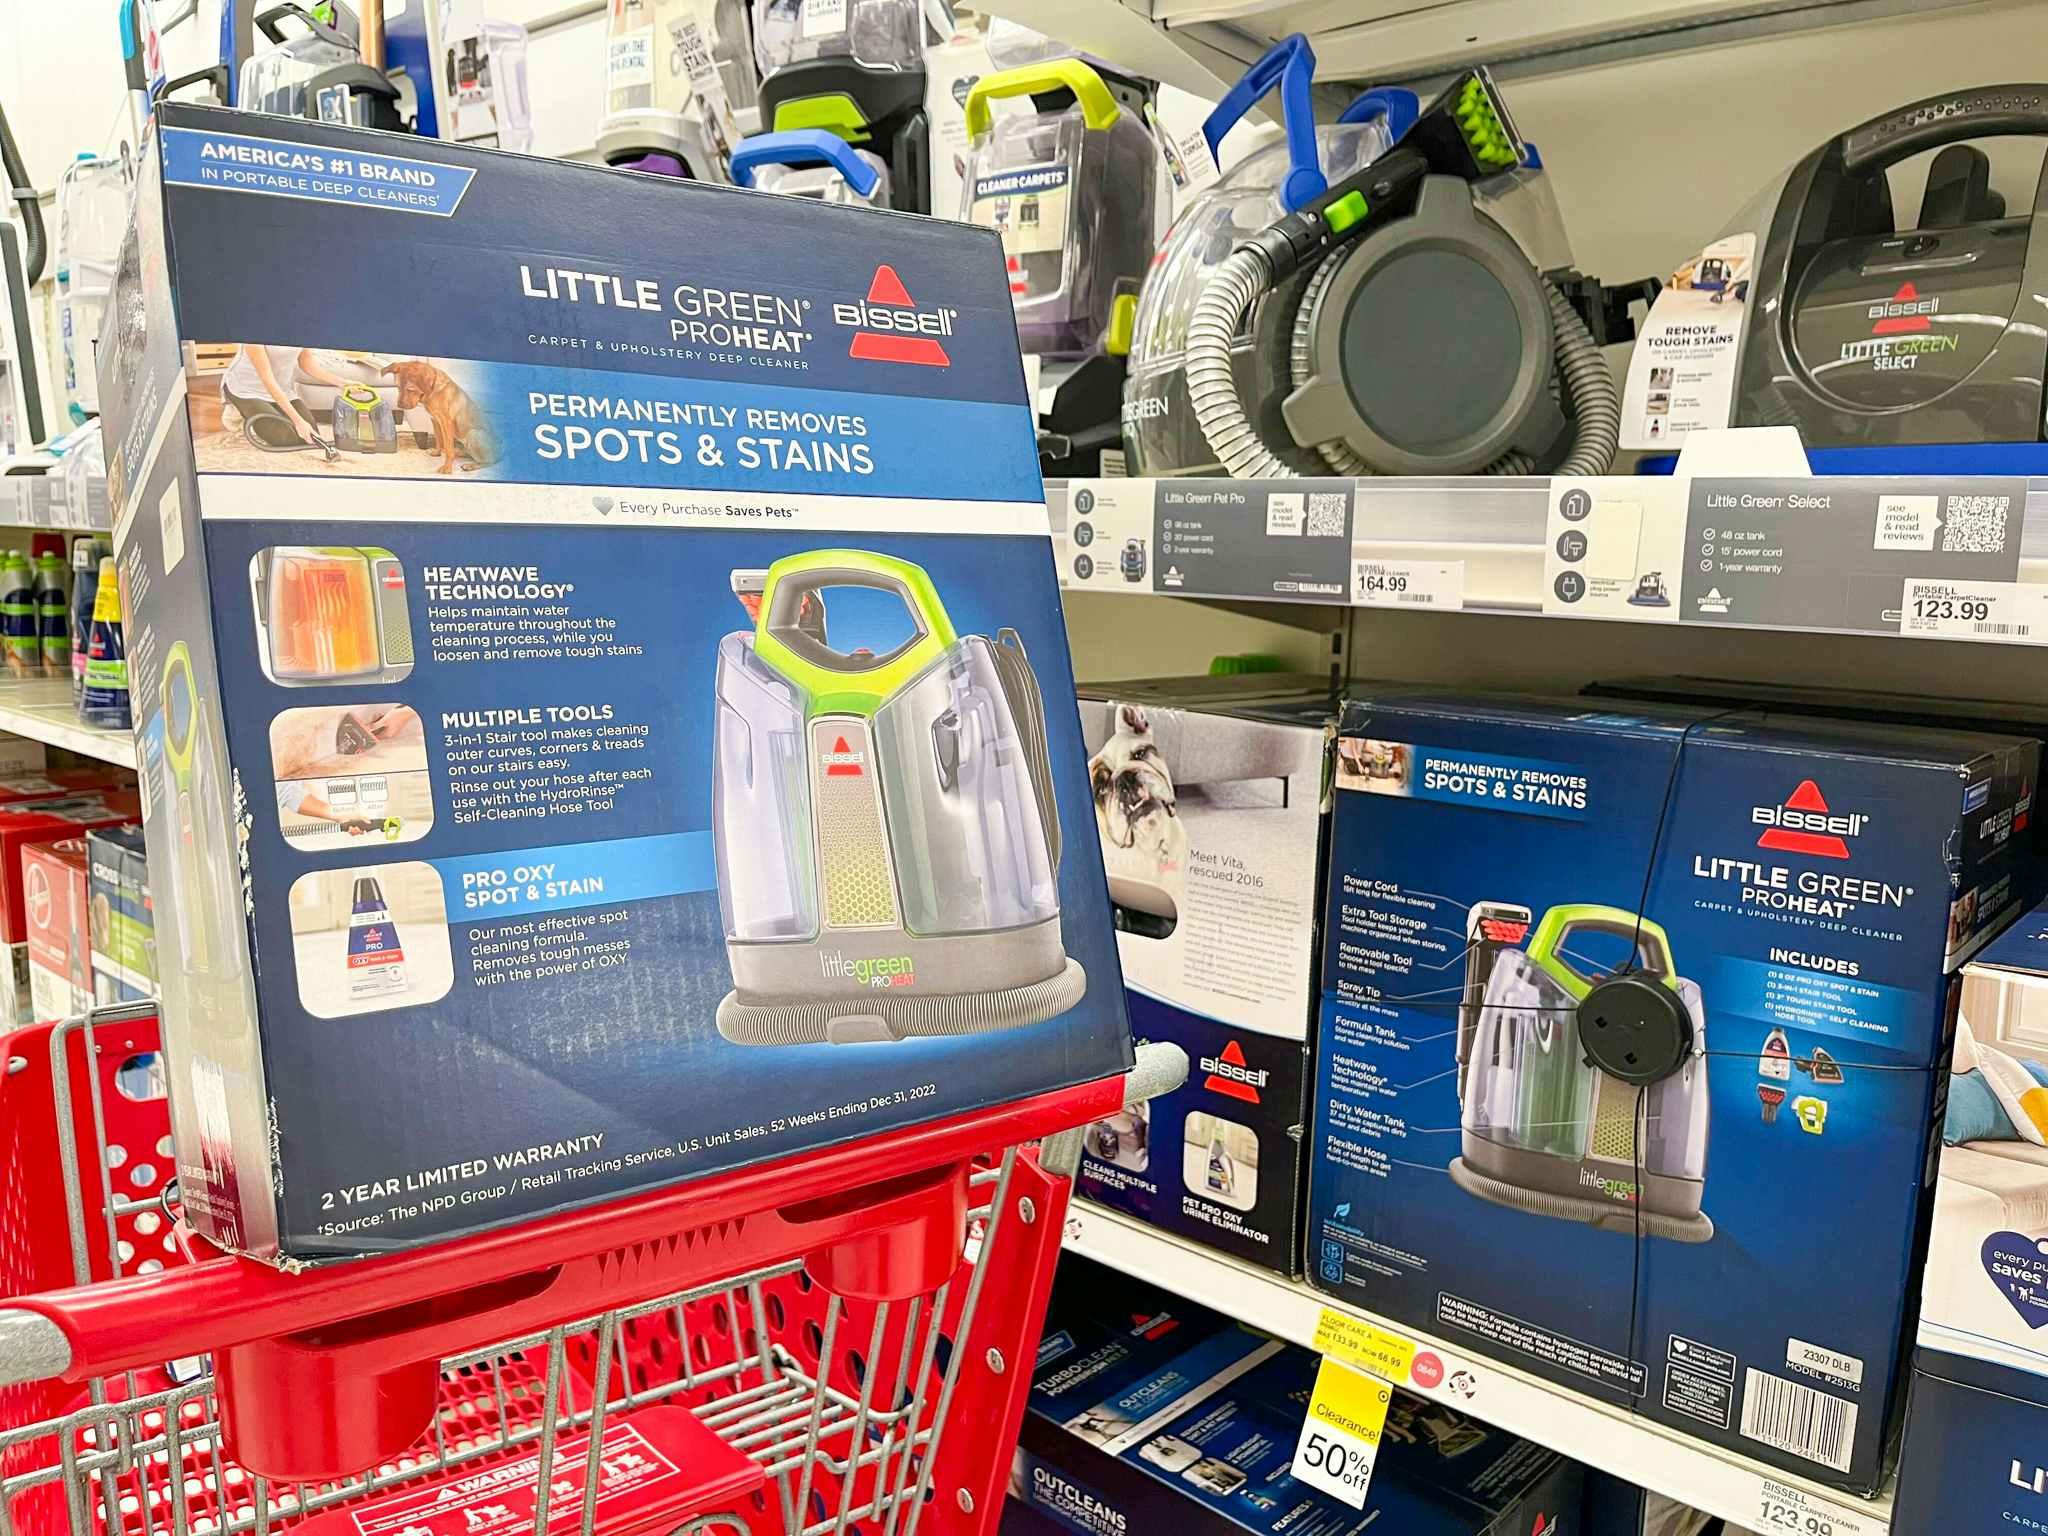 Bissell Little Green ProHeat on Clearance for 50% Off at Target